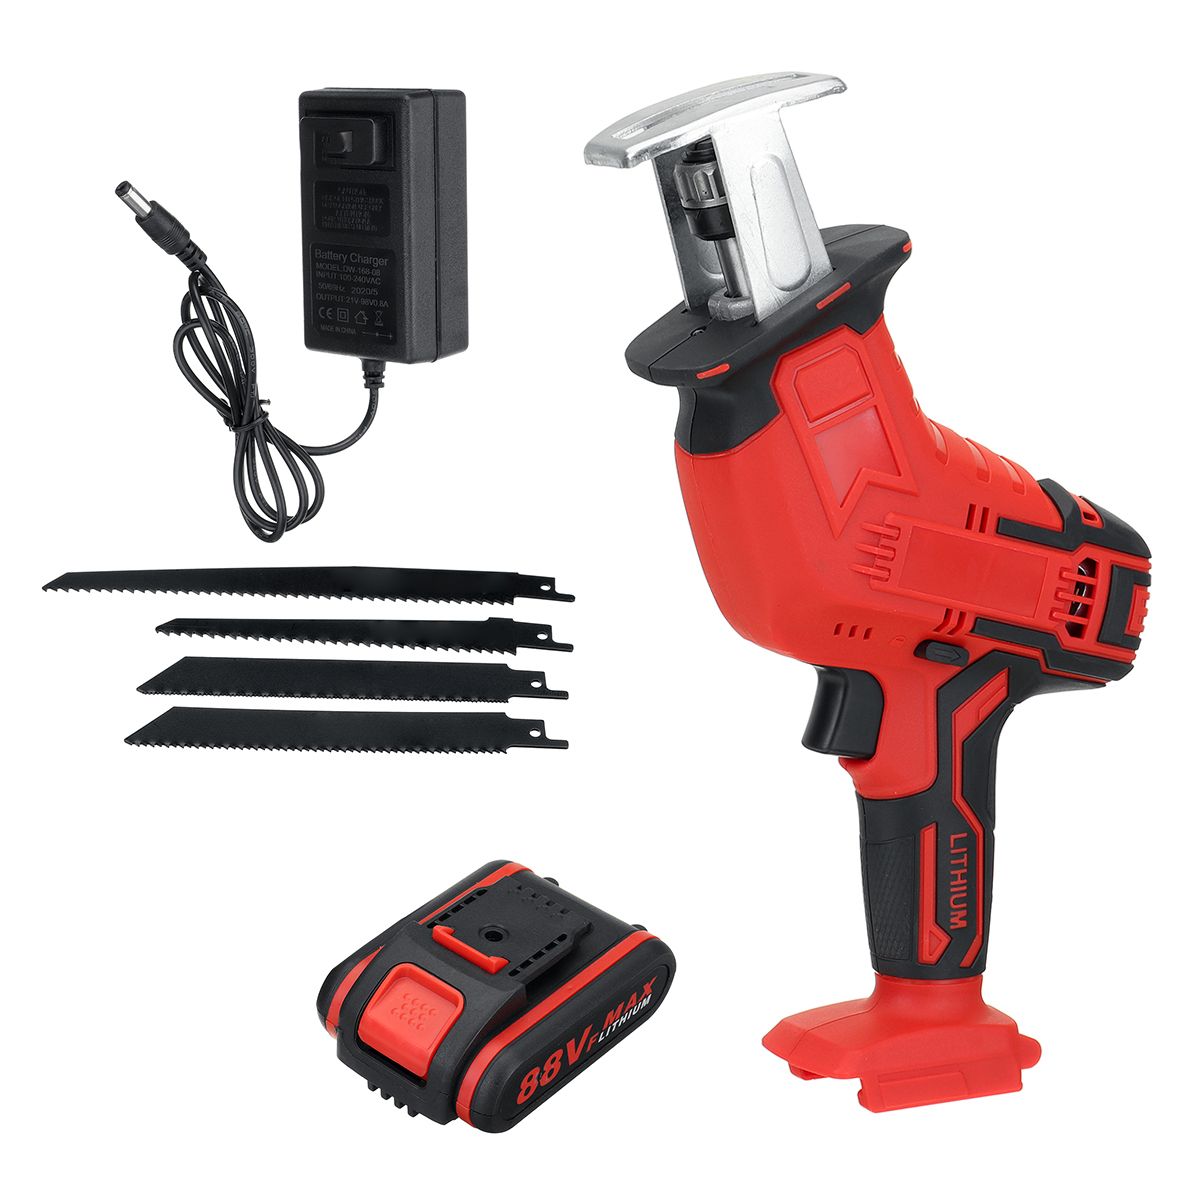 88VF-Electric-Reciprocating-Saws-Outdoor-Woodworking-Cordless-Portable-Wood-Cutting-Saw-1718639